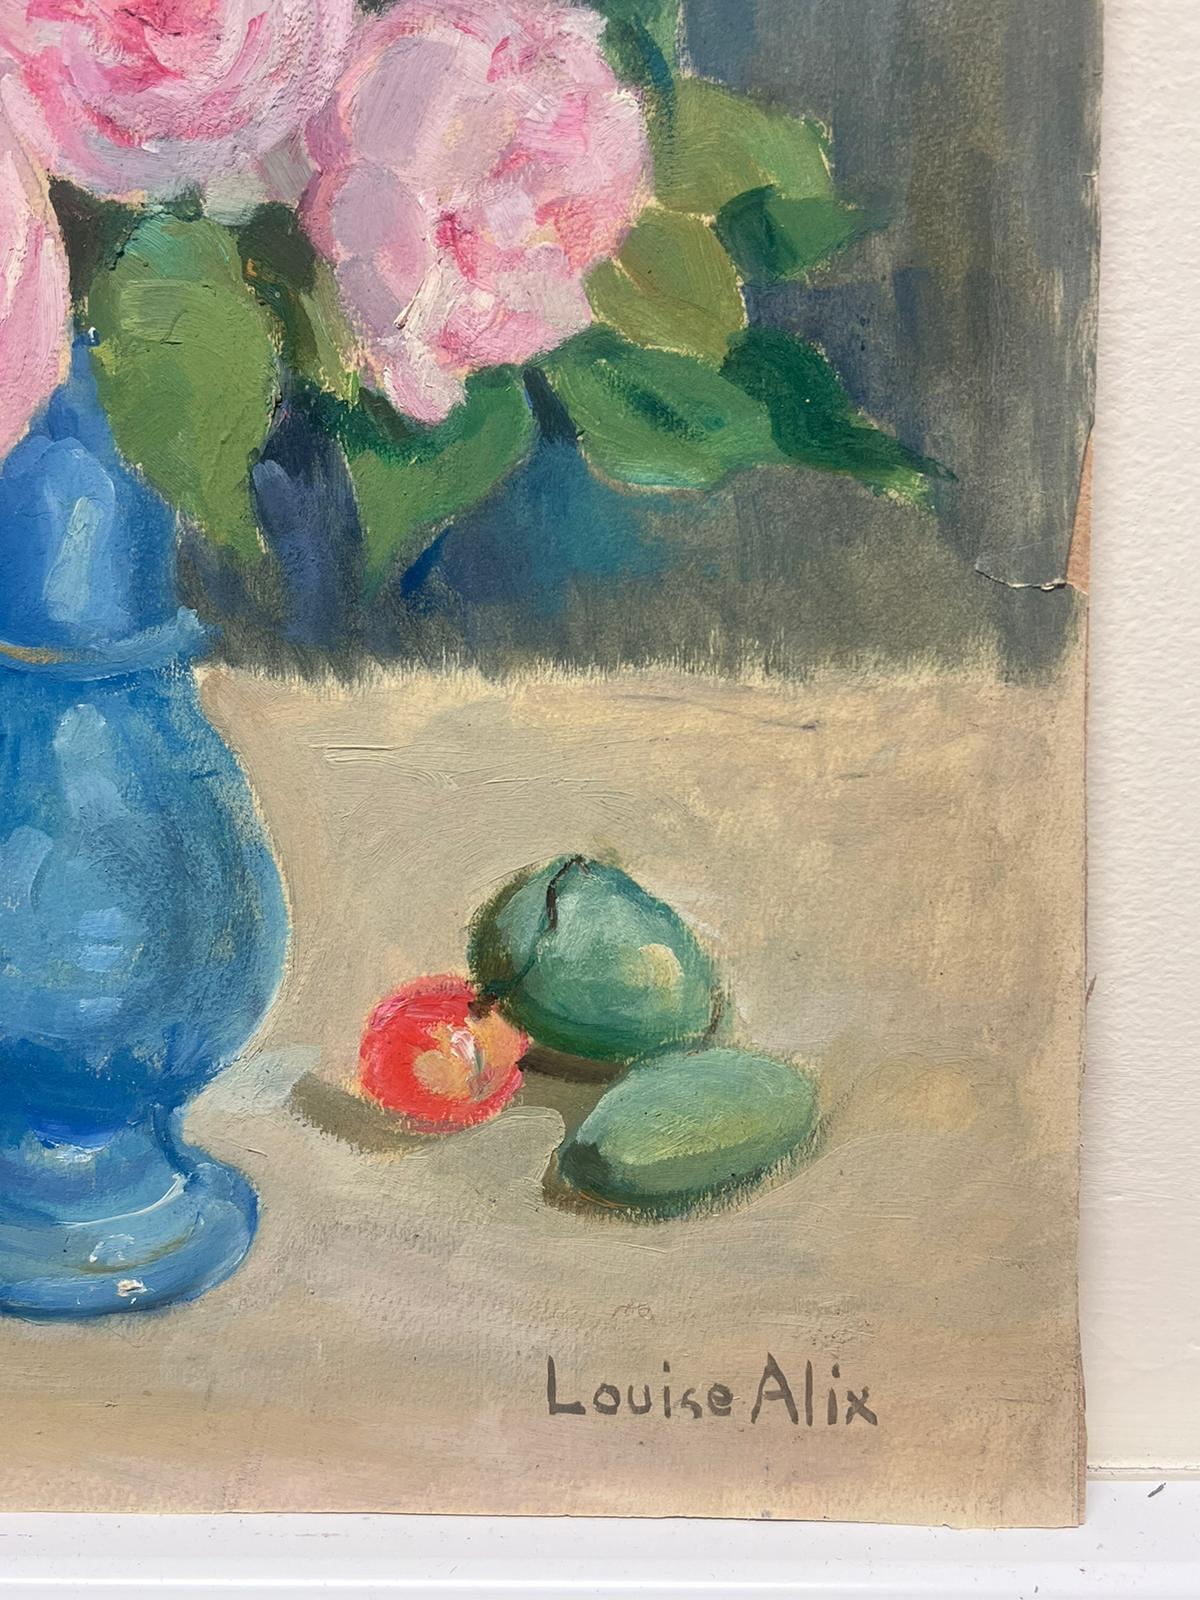 Pink Roses
by Louise Alix (French, 1888-1980) *see notes below
provenance stamp to the back 
signed by oil painting on board, unframed
measures: 16.5 high by 13.5 inches wide
condition: overall very good and sound, a few scuffs and marks to the